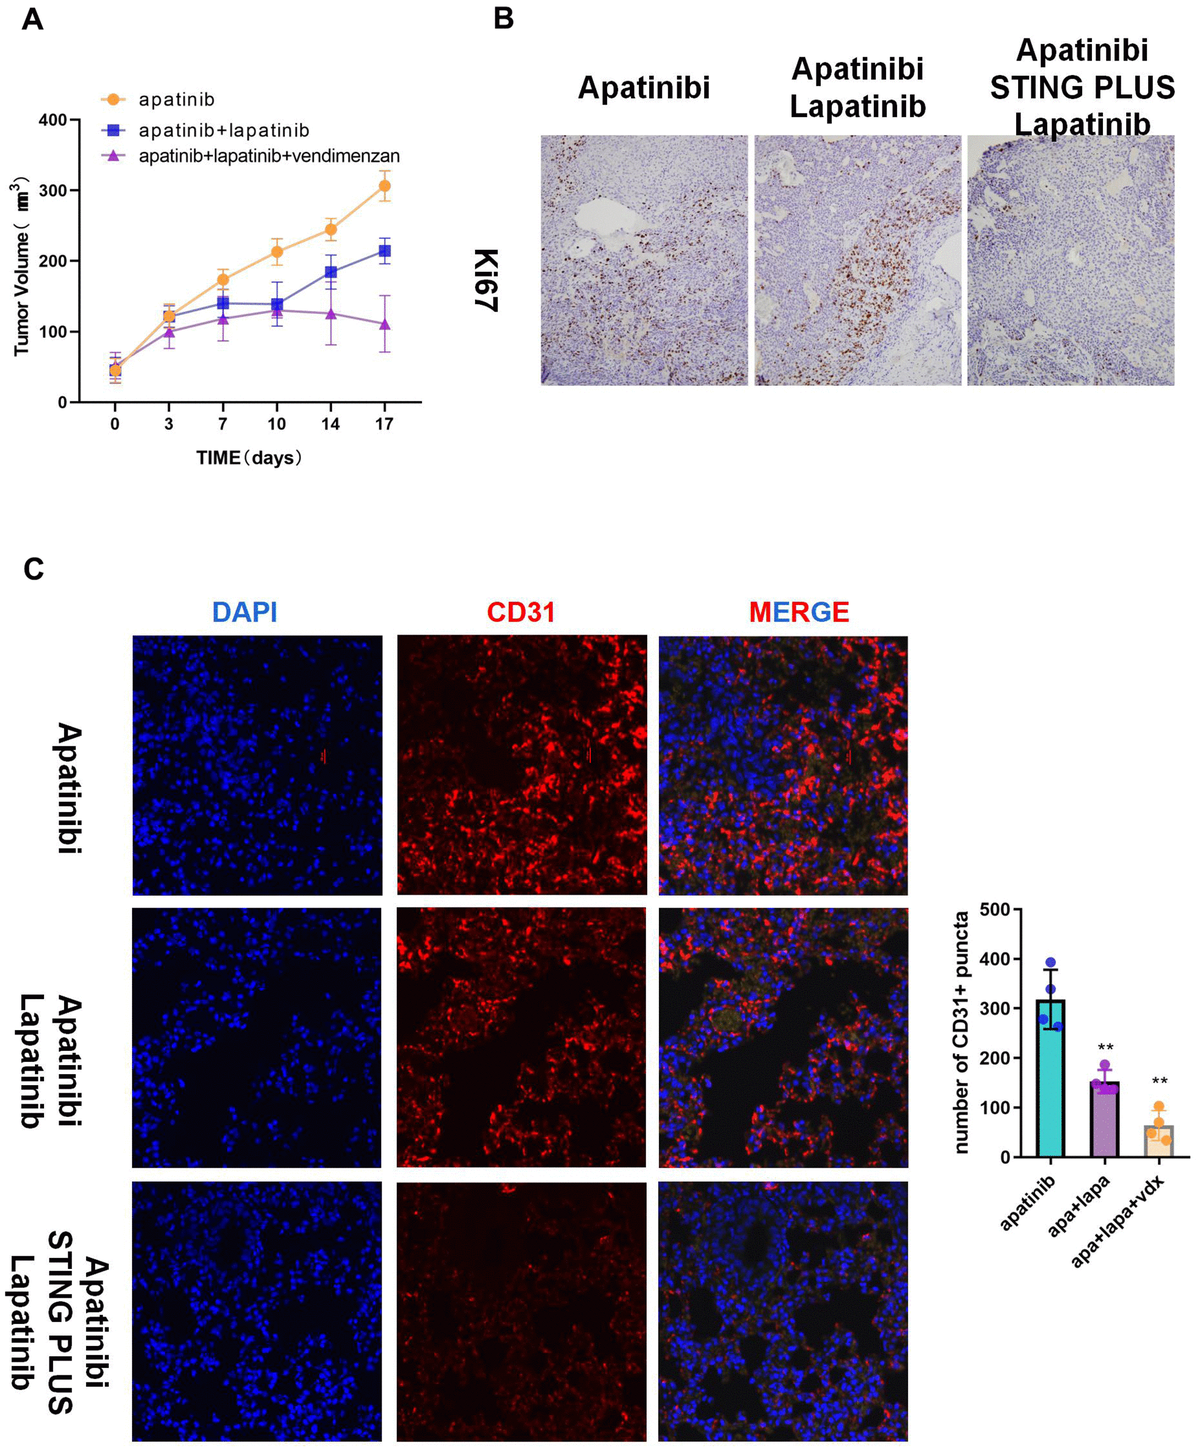 The combination of vadimenzan and lapatinib re-sensitizes AR cells to apatinib in vivo. (A) After washing with PBS three times, AR cells (total of 1 × 106) suspended in 50 μL of DMEM were injected in each injection site. The tumor volumes of the mice were evaluated among the three groups. (B) Ki67 staining images of cancer samples in the different groups. (C) Representative images of subcutaneous tumors using immunofluorescence staining against CD31 and DAPI nuclear staining. *P 